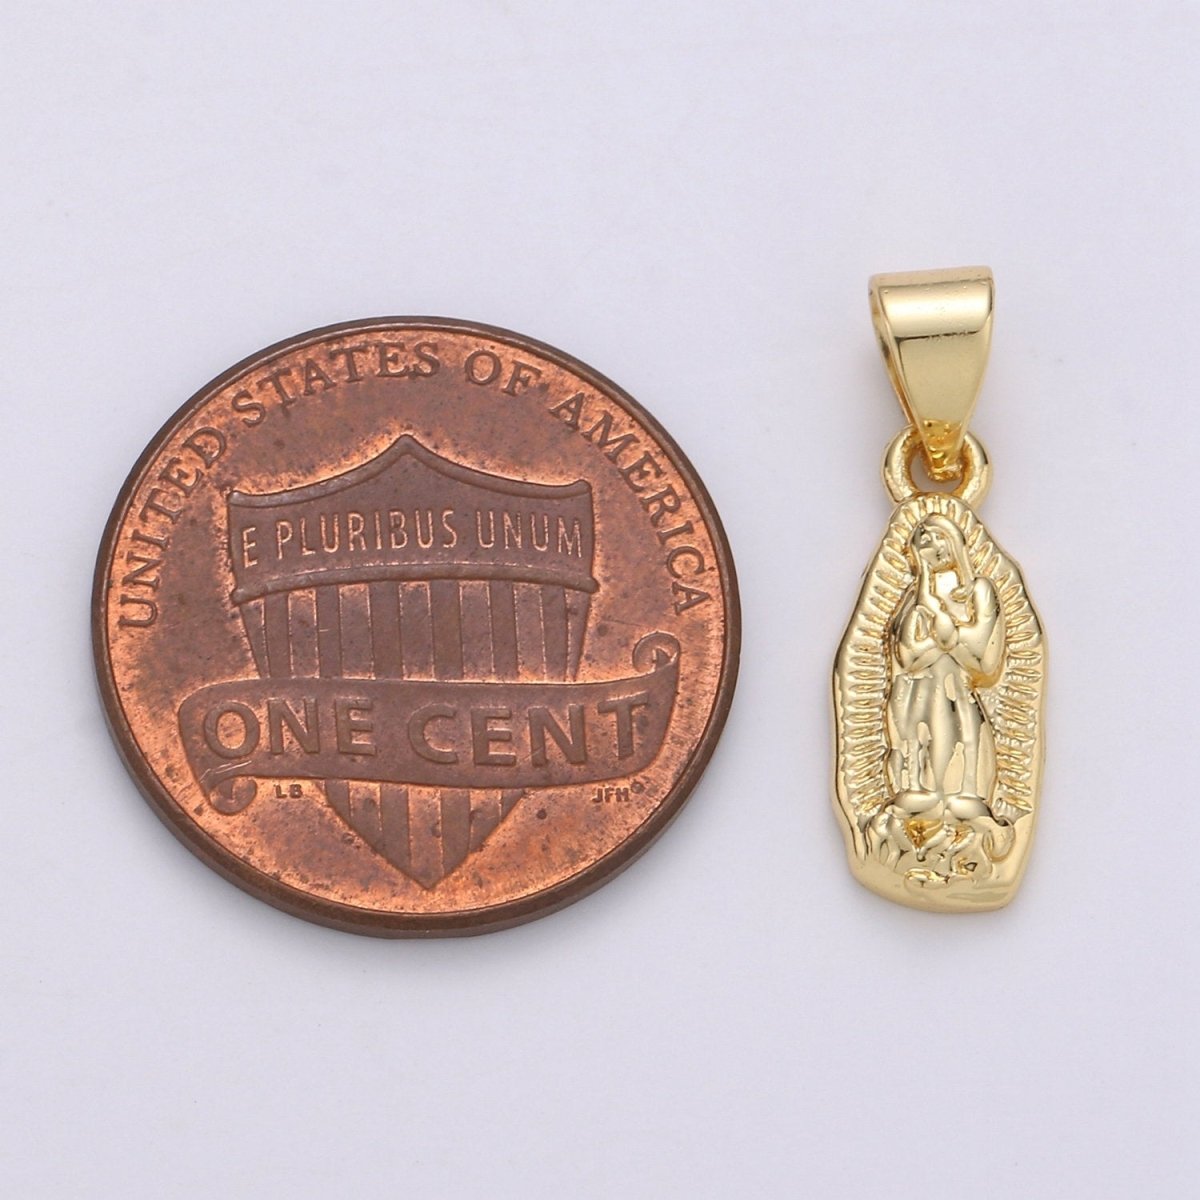 Vintage Mary Charm Necklace 14K Gold Filled Holy Mary Pendant Necklace, Our Lady of Guadalupe Pendant Necklace For Religious Jewelry Making J-006 - DLUXCA